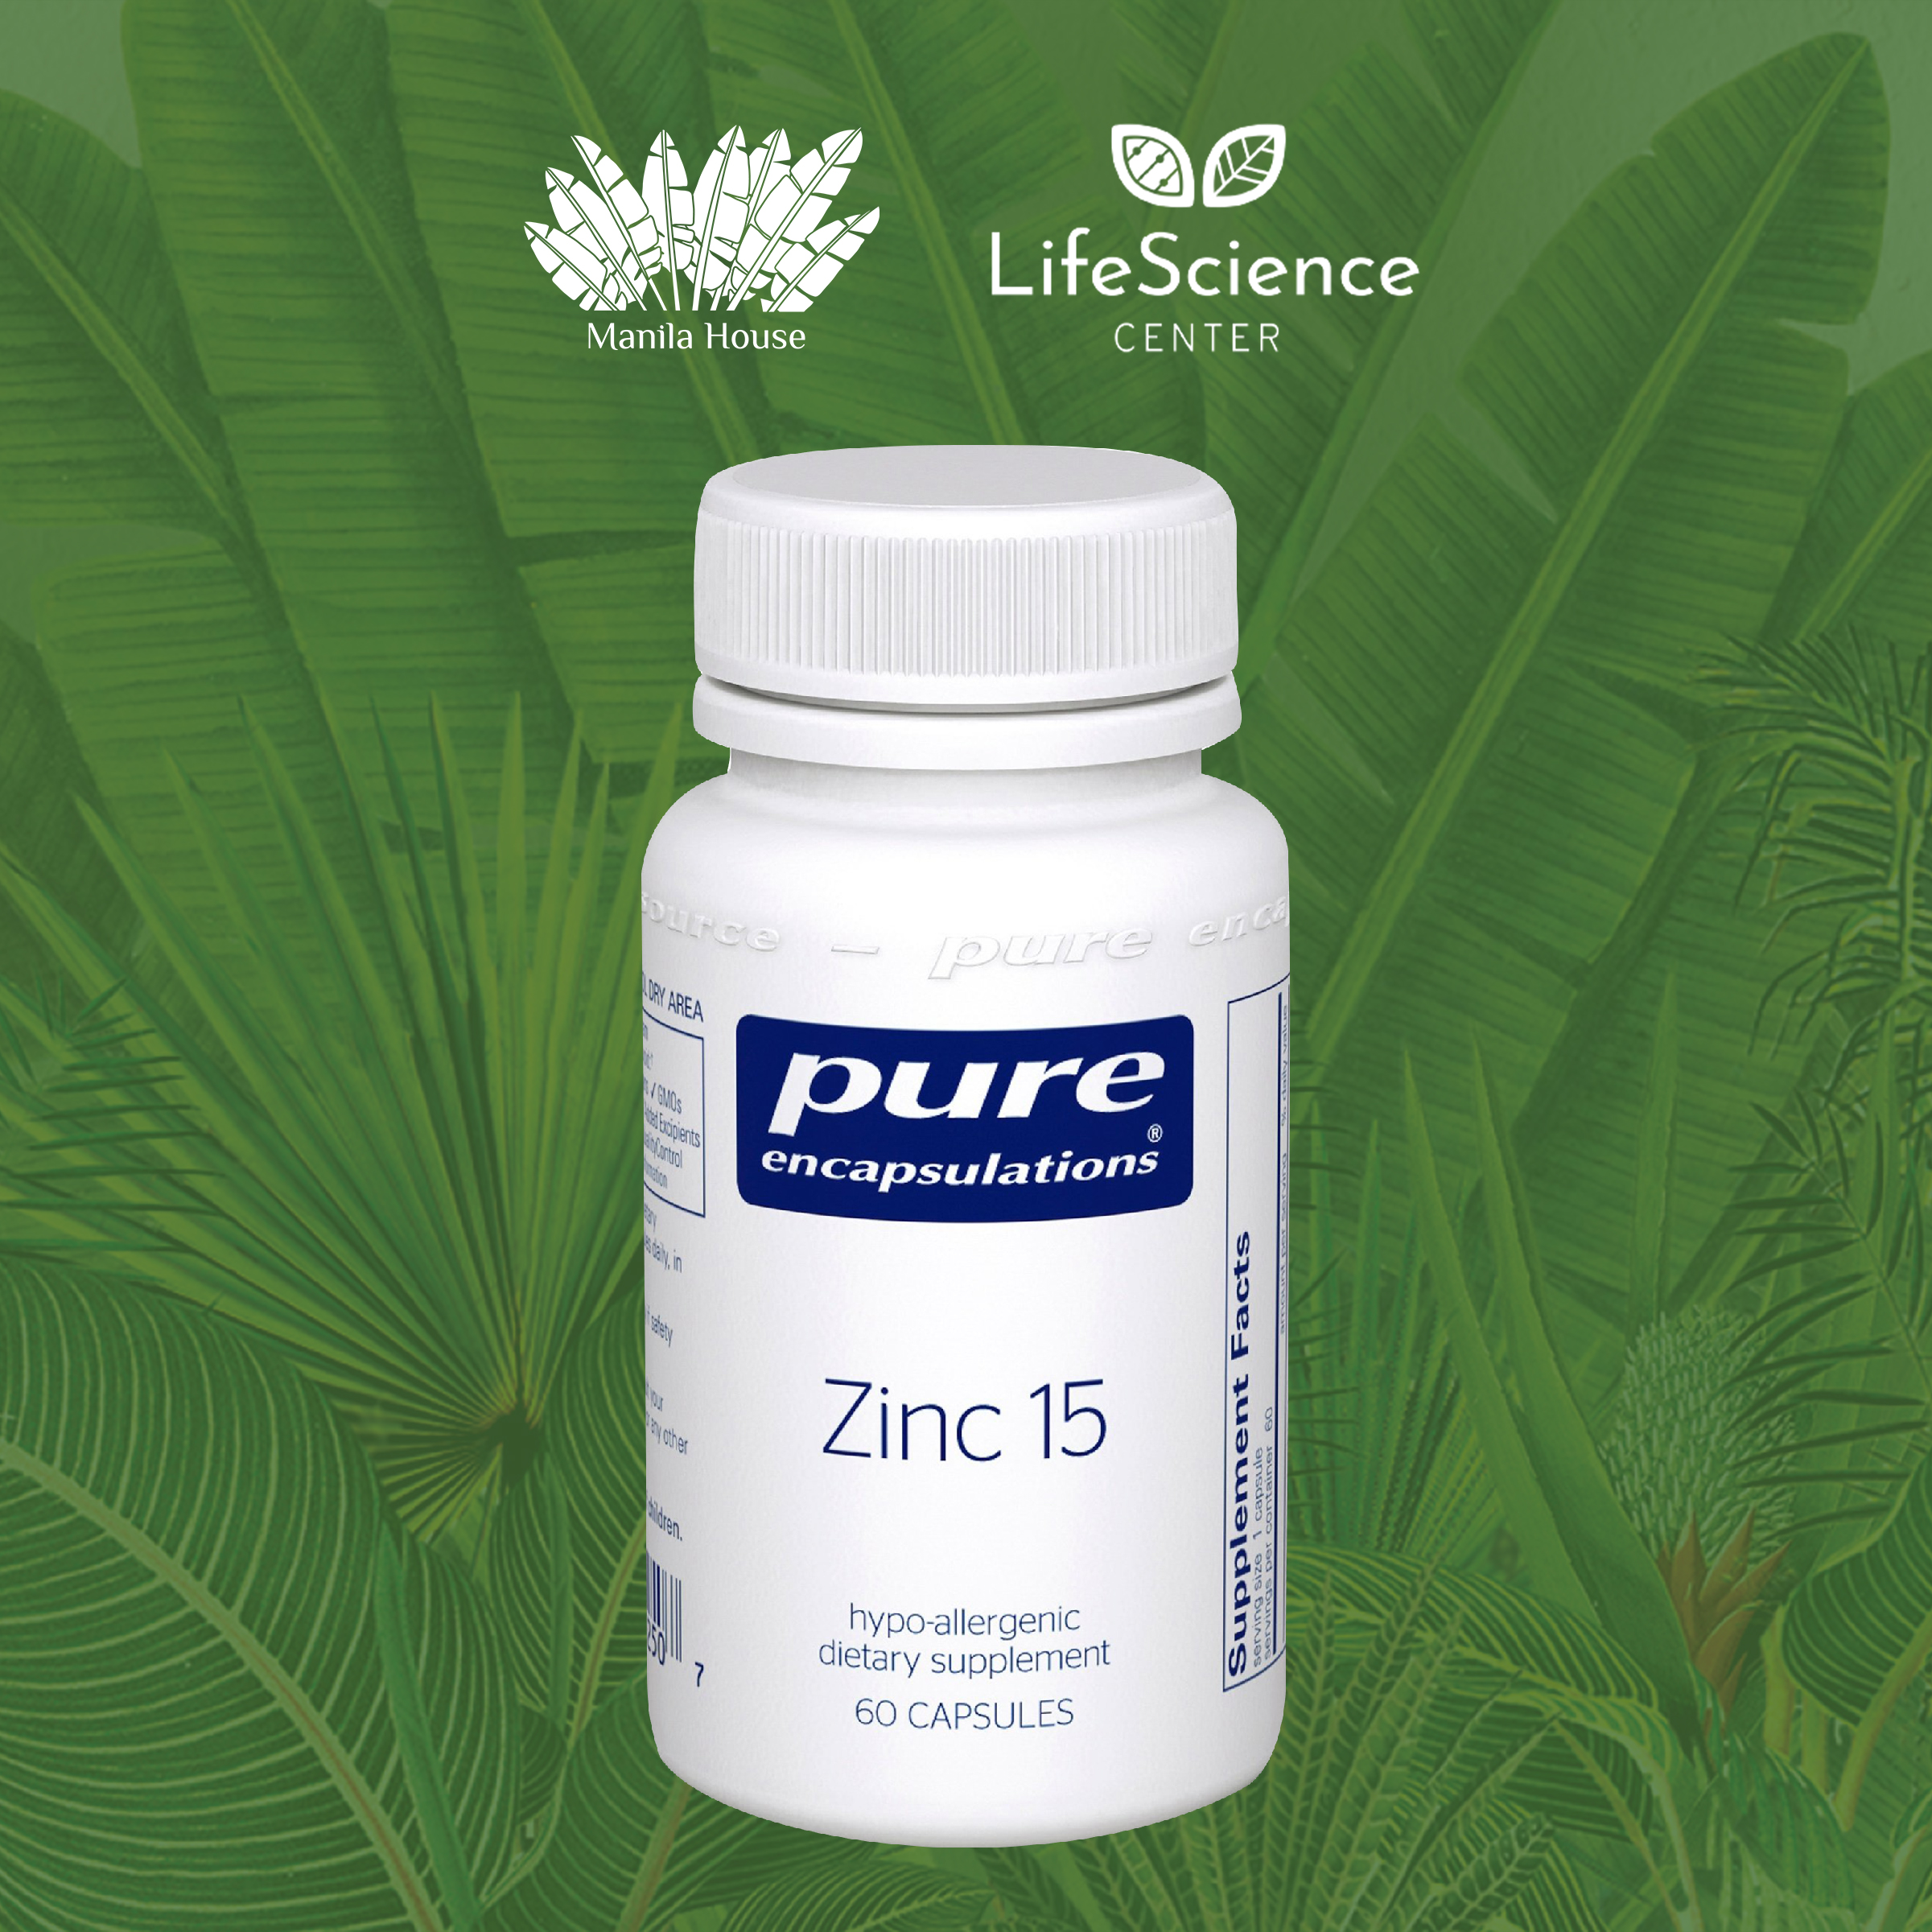 Pure Encapsulations Zinc Picolinate for Sale from the Retail Shop of Manila House Private Club Inc